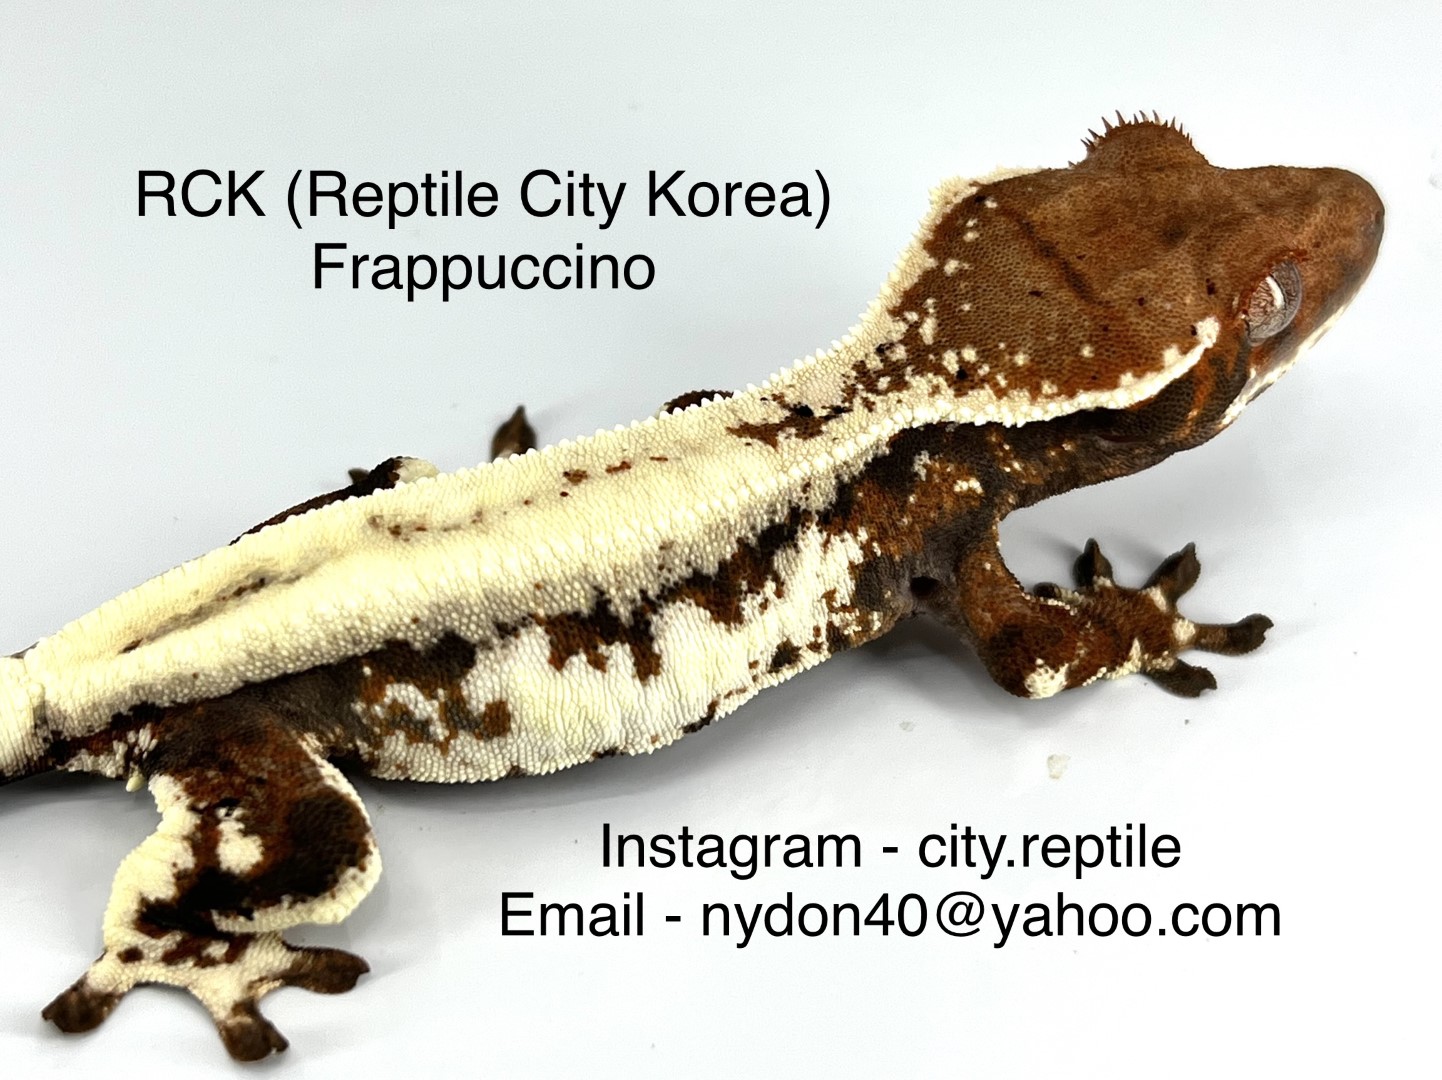 RCK Frappuccino by LIL MONSTER REPTILES